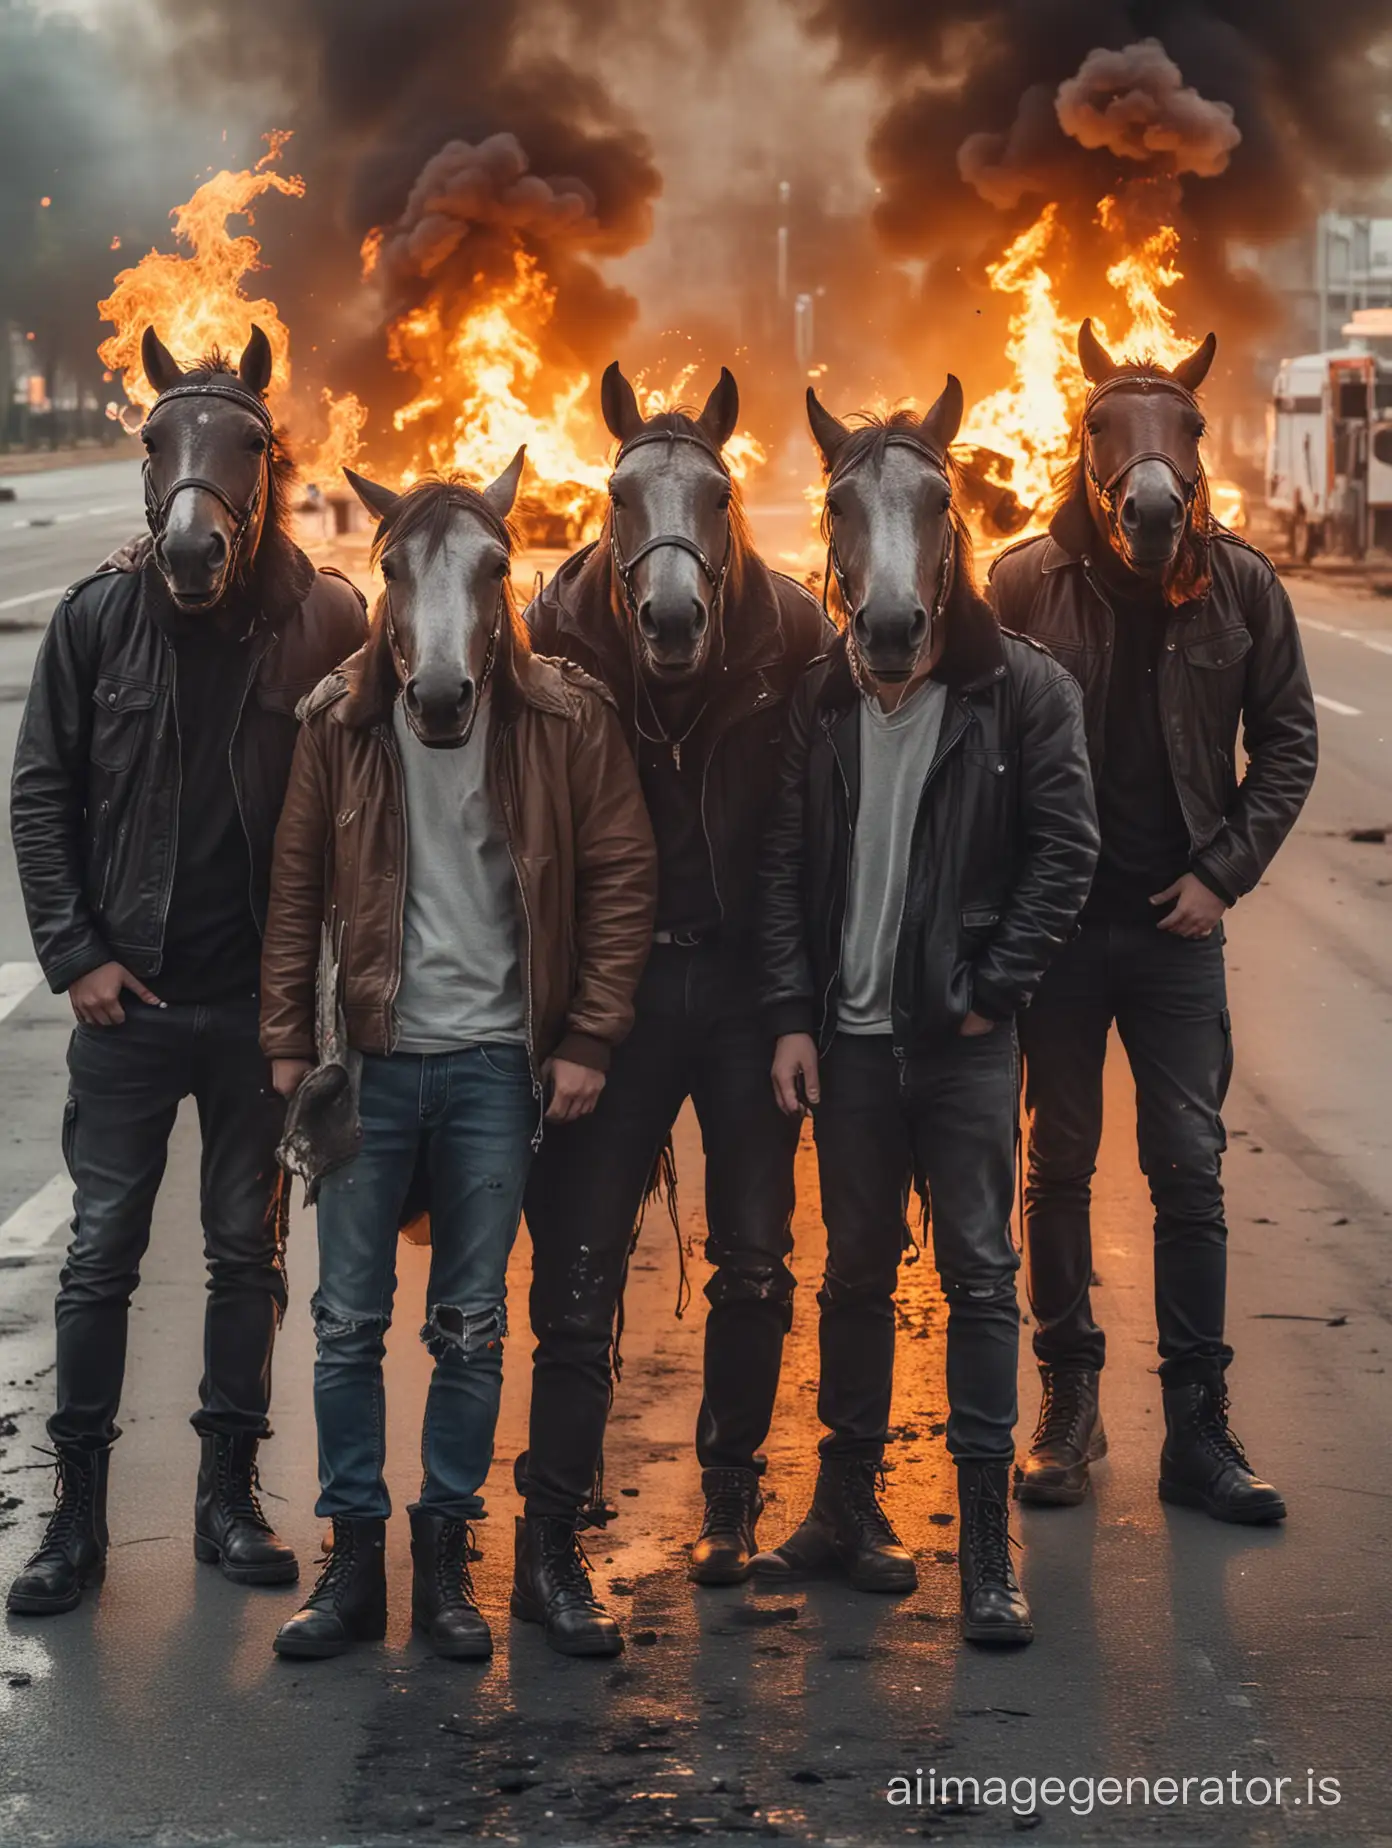 Urban-Hooligans-with-Horse-Head-Masks-Holding-Flares-in-Middle-of-Road